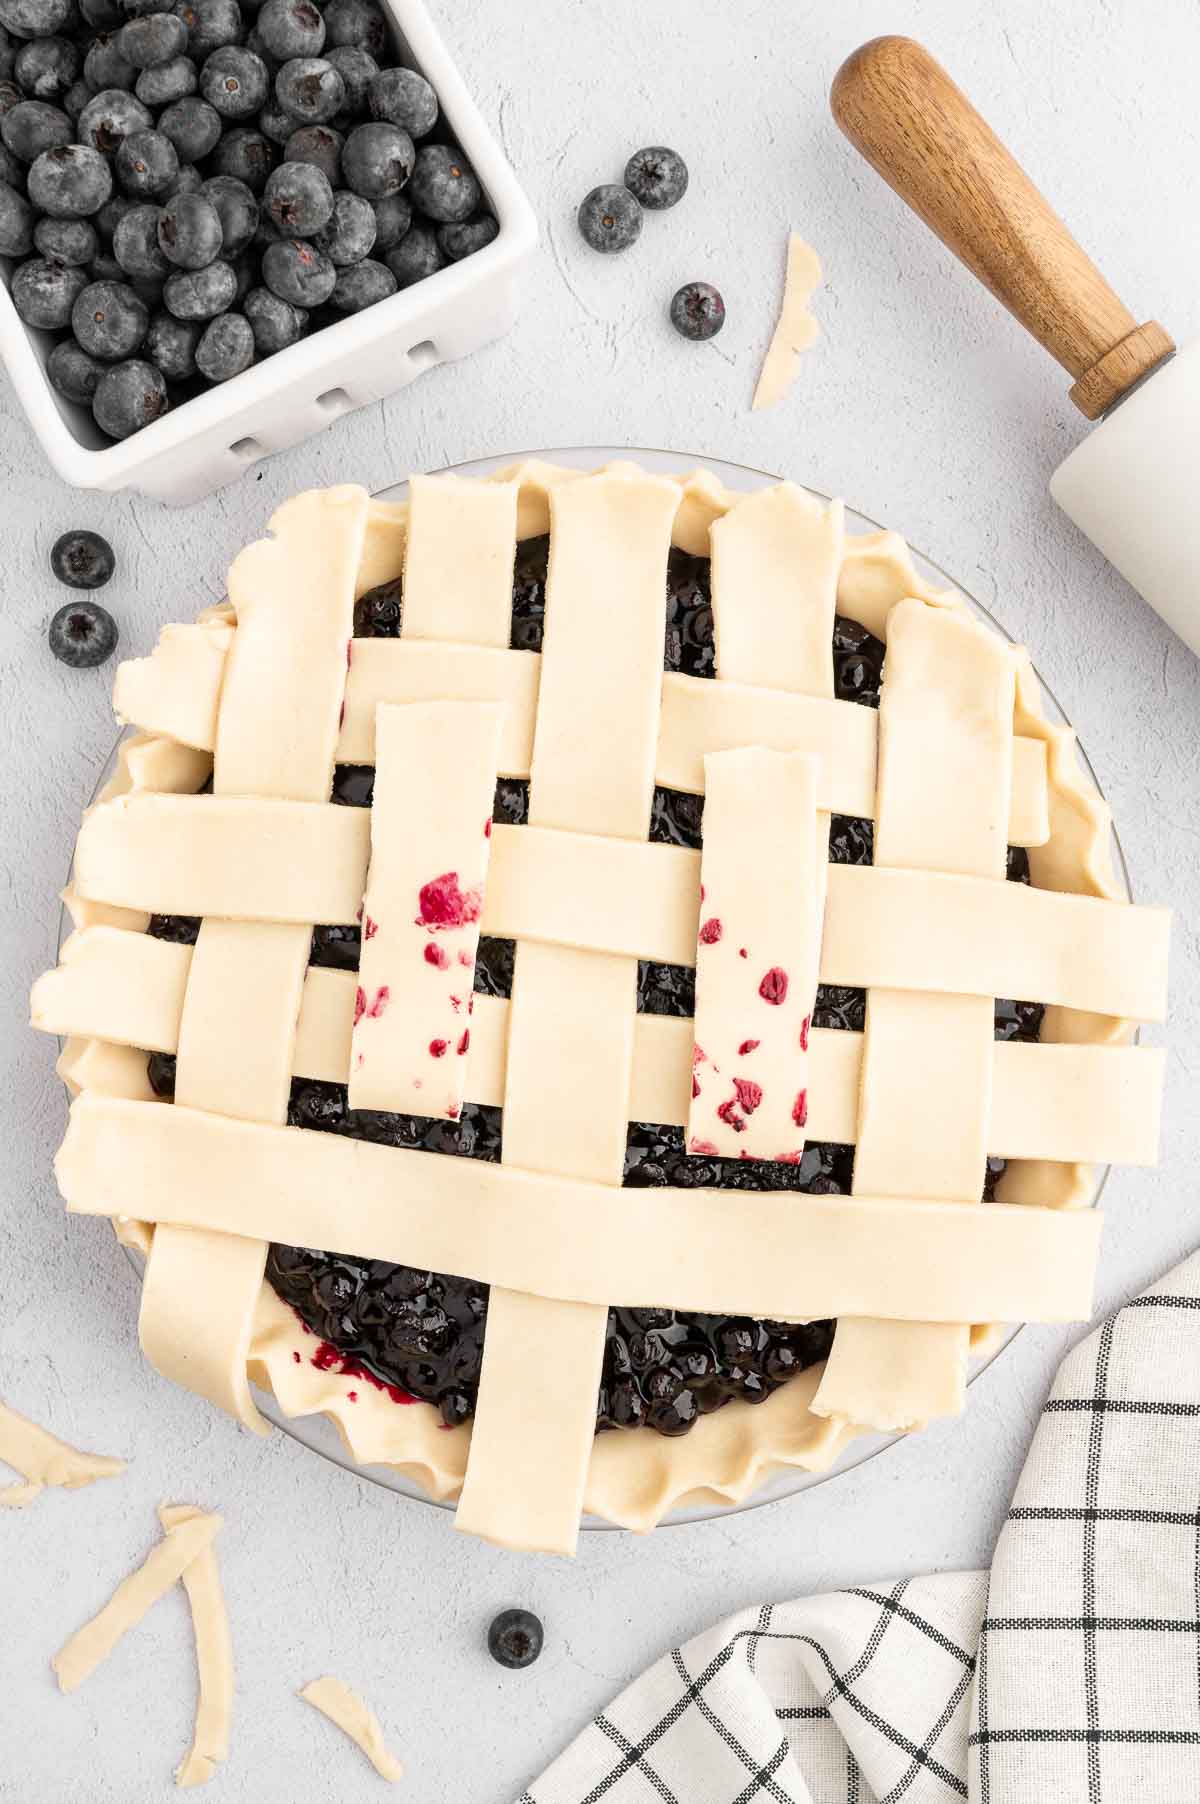 A partial lattice pattern with the pie crust dough strips on top of the blueberry pie.